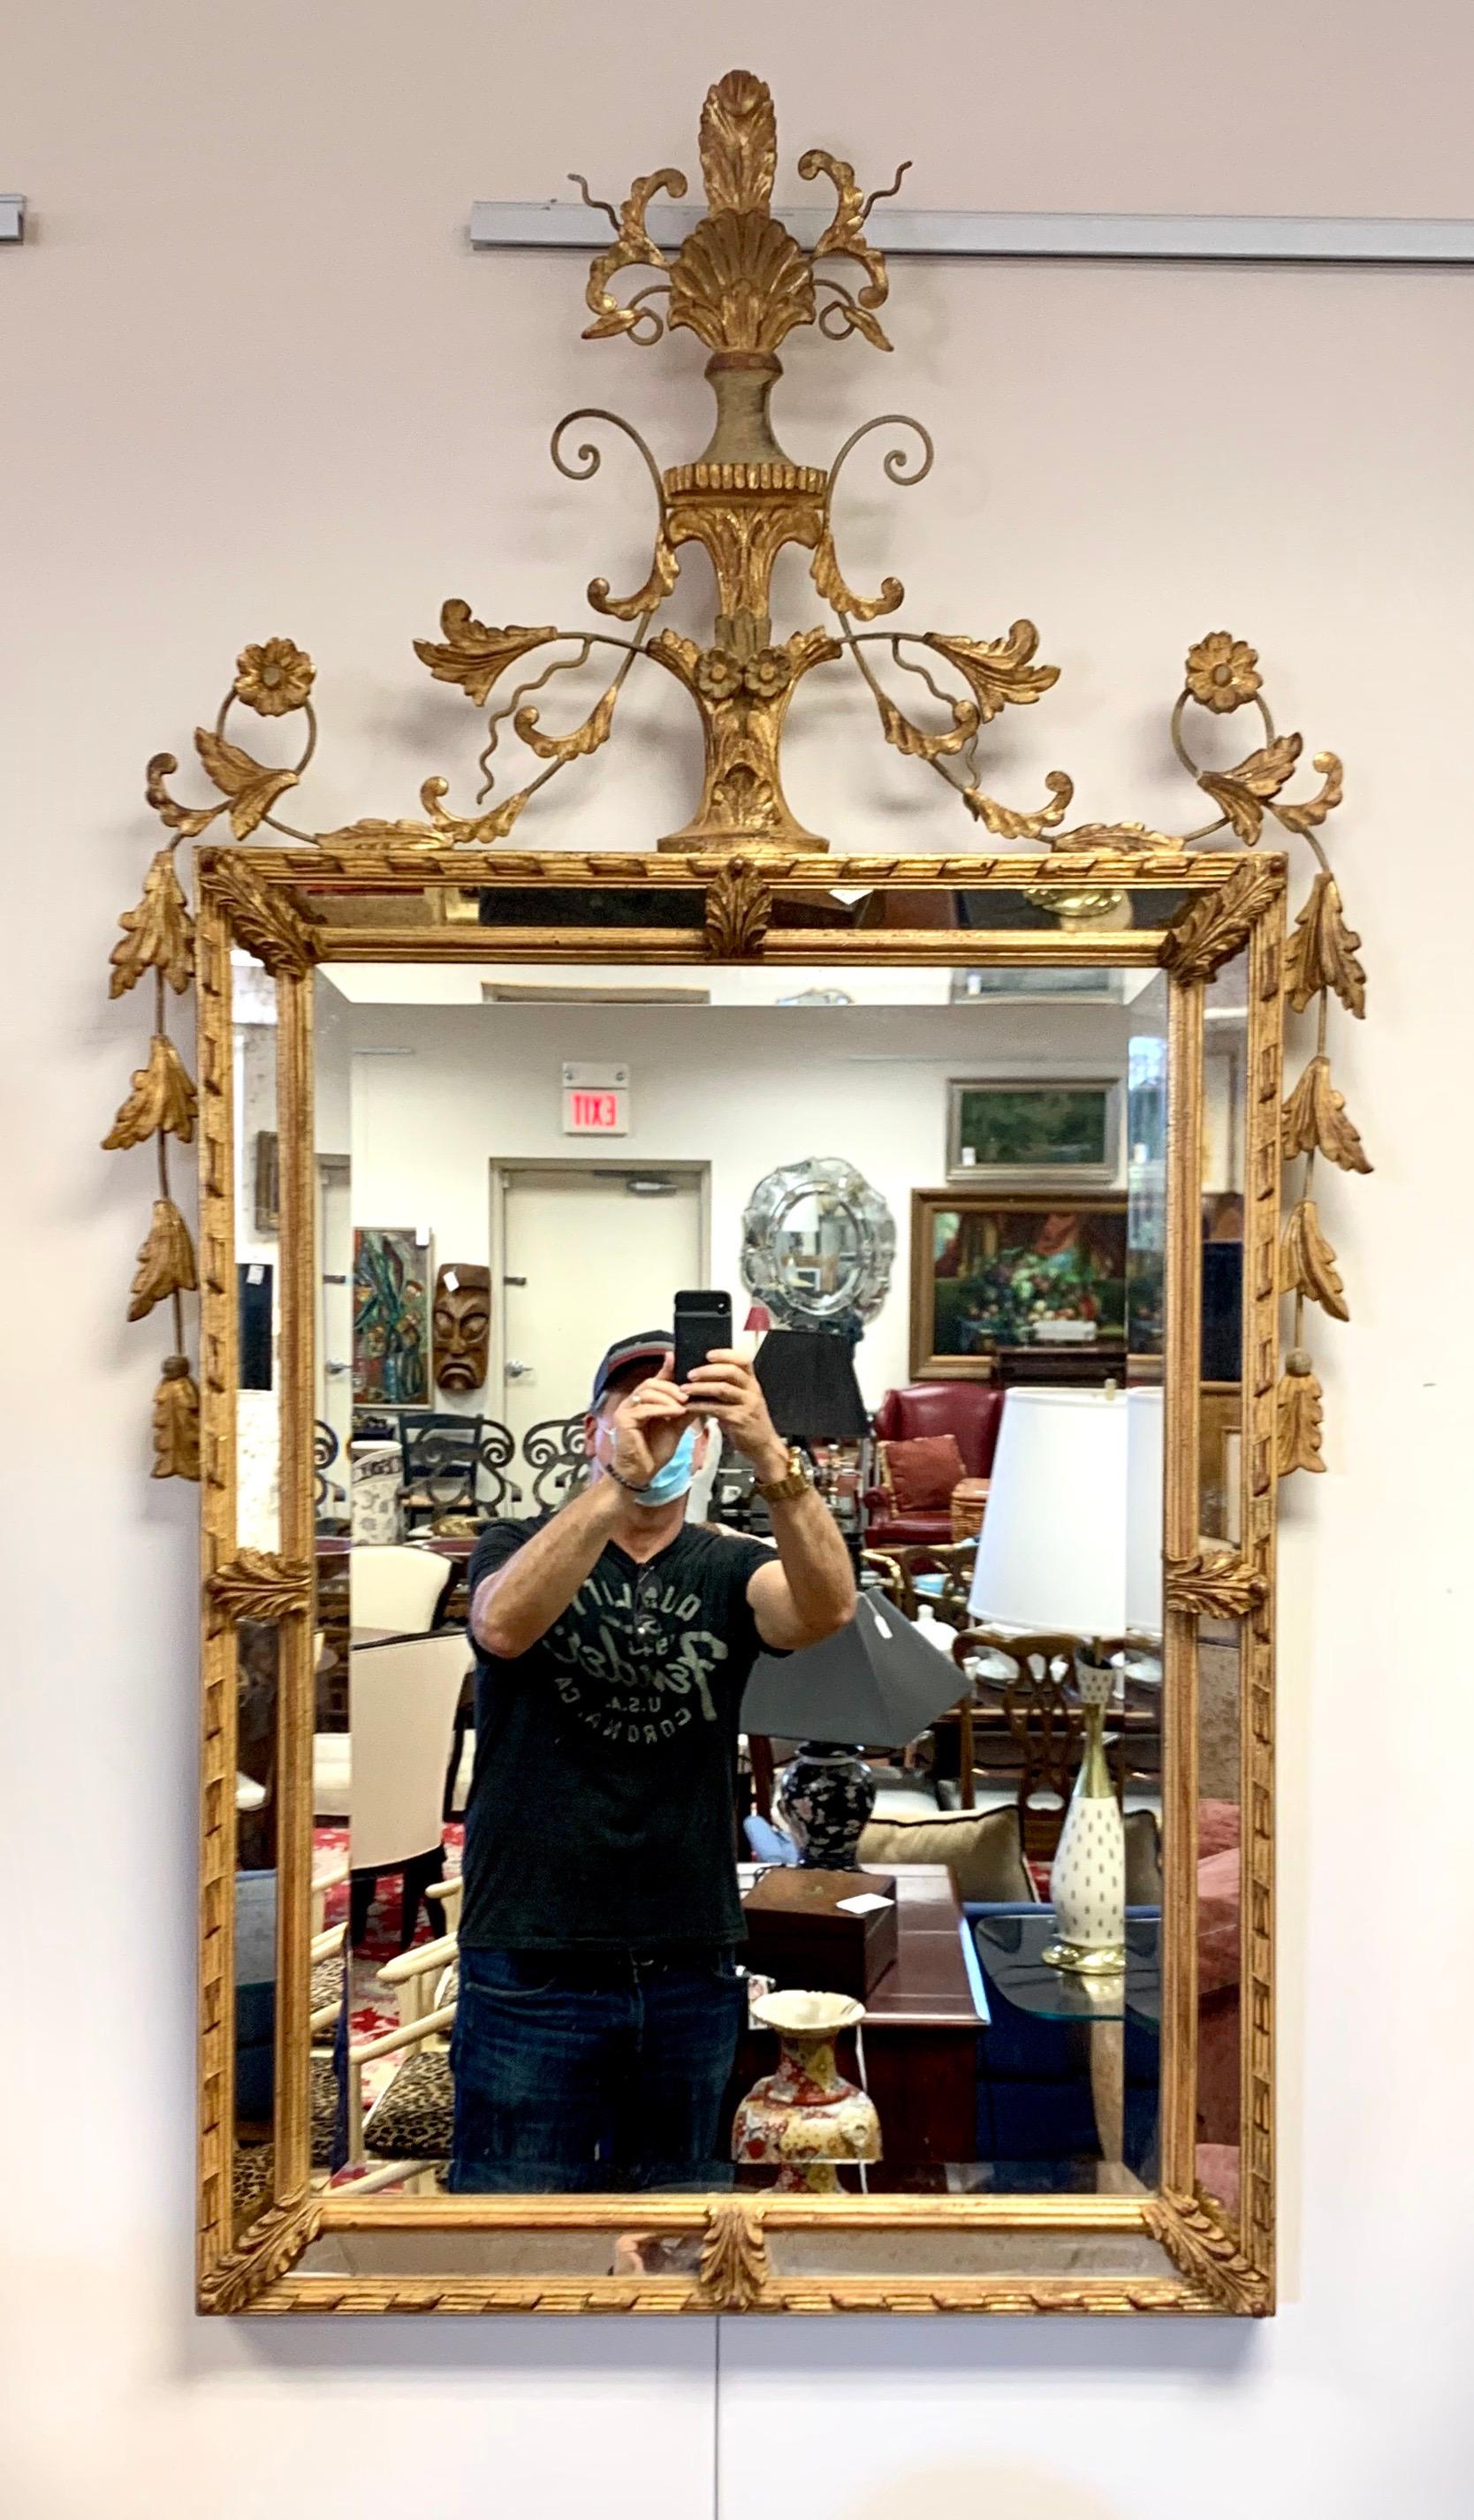 Intricately carved neoclassical giltwood wall mirror, circa early 20th century.
Decorated with a shell crest and scrolling foliate detail. Center mirror is surrounded by
a frame of beveled mirrors. Guaranteed to make a bold statement in any room.